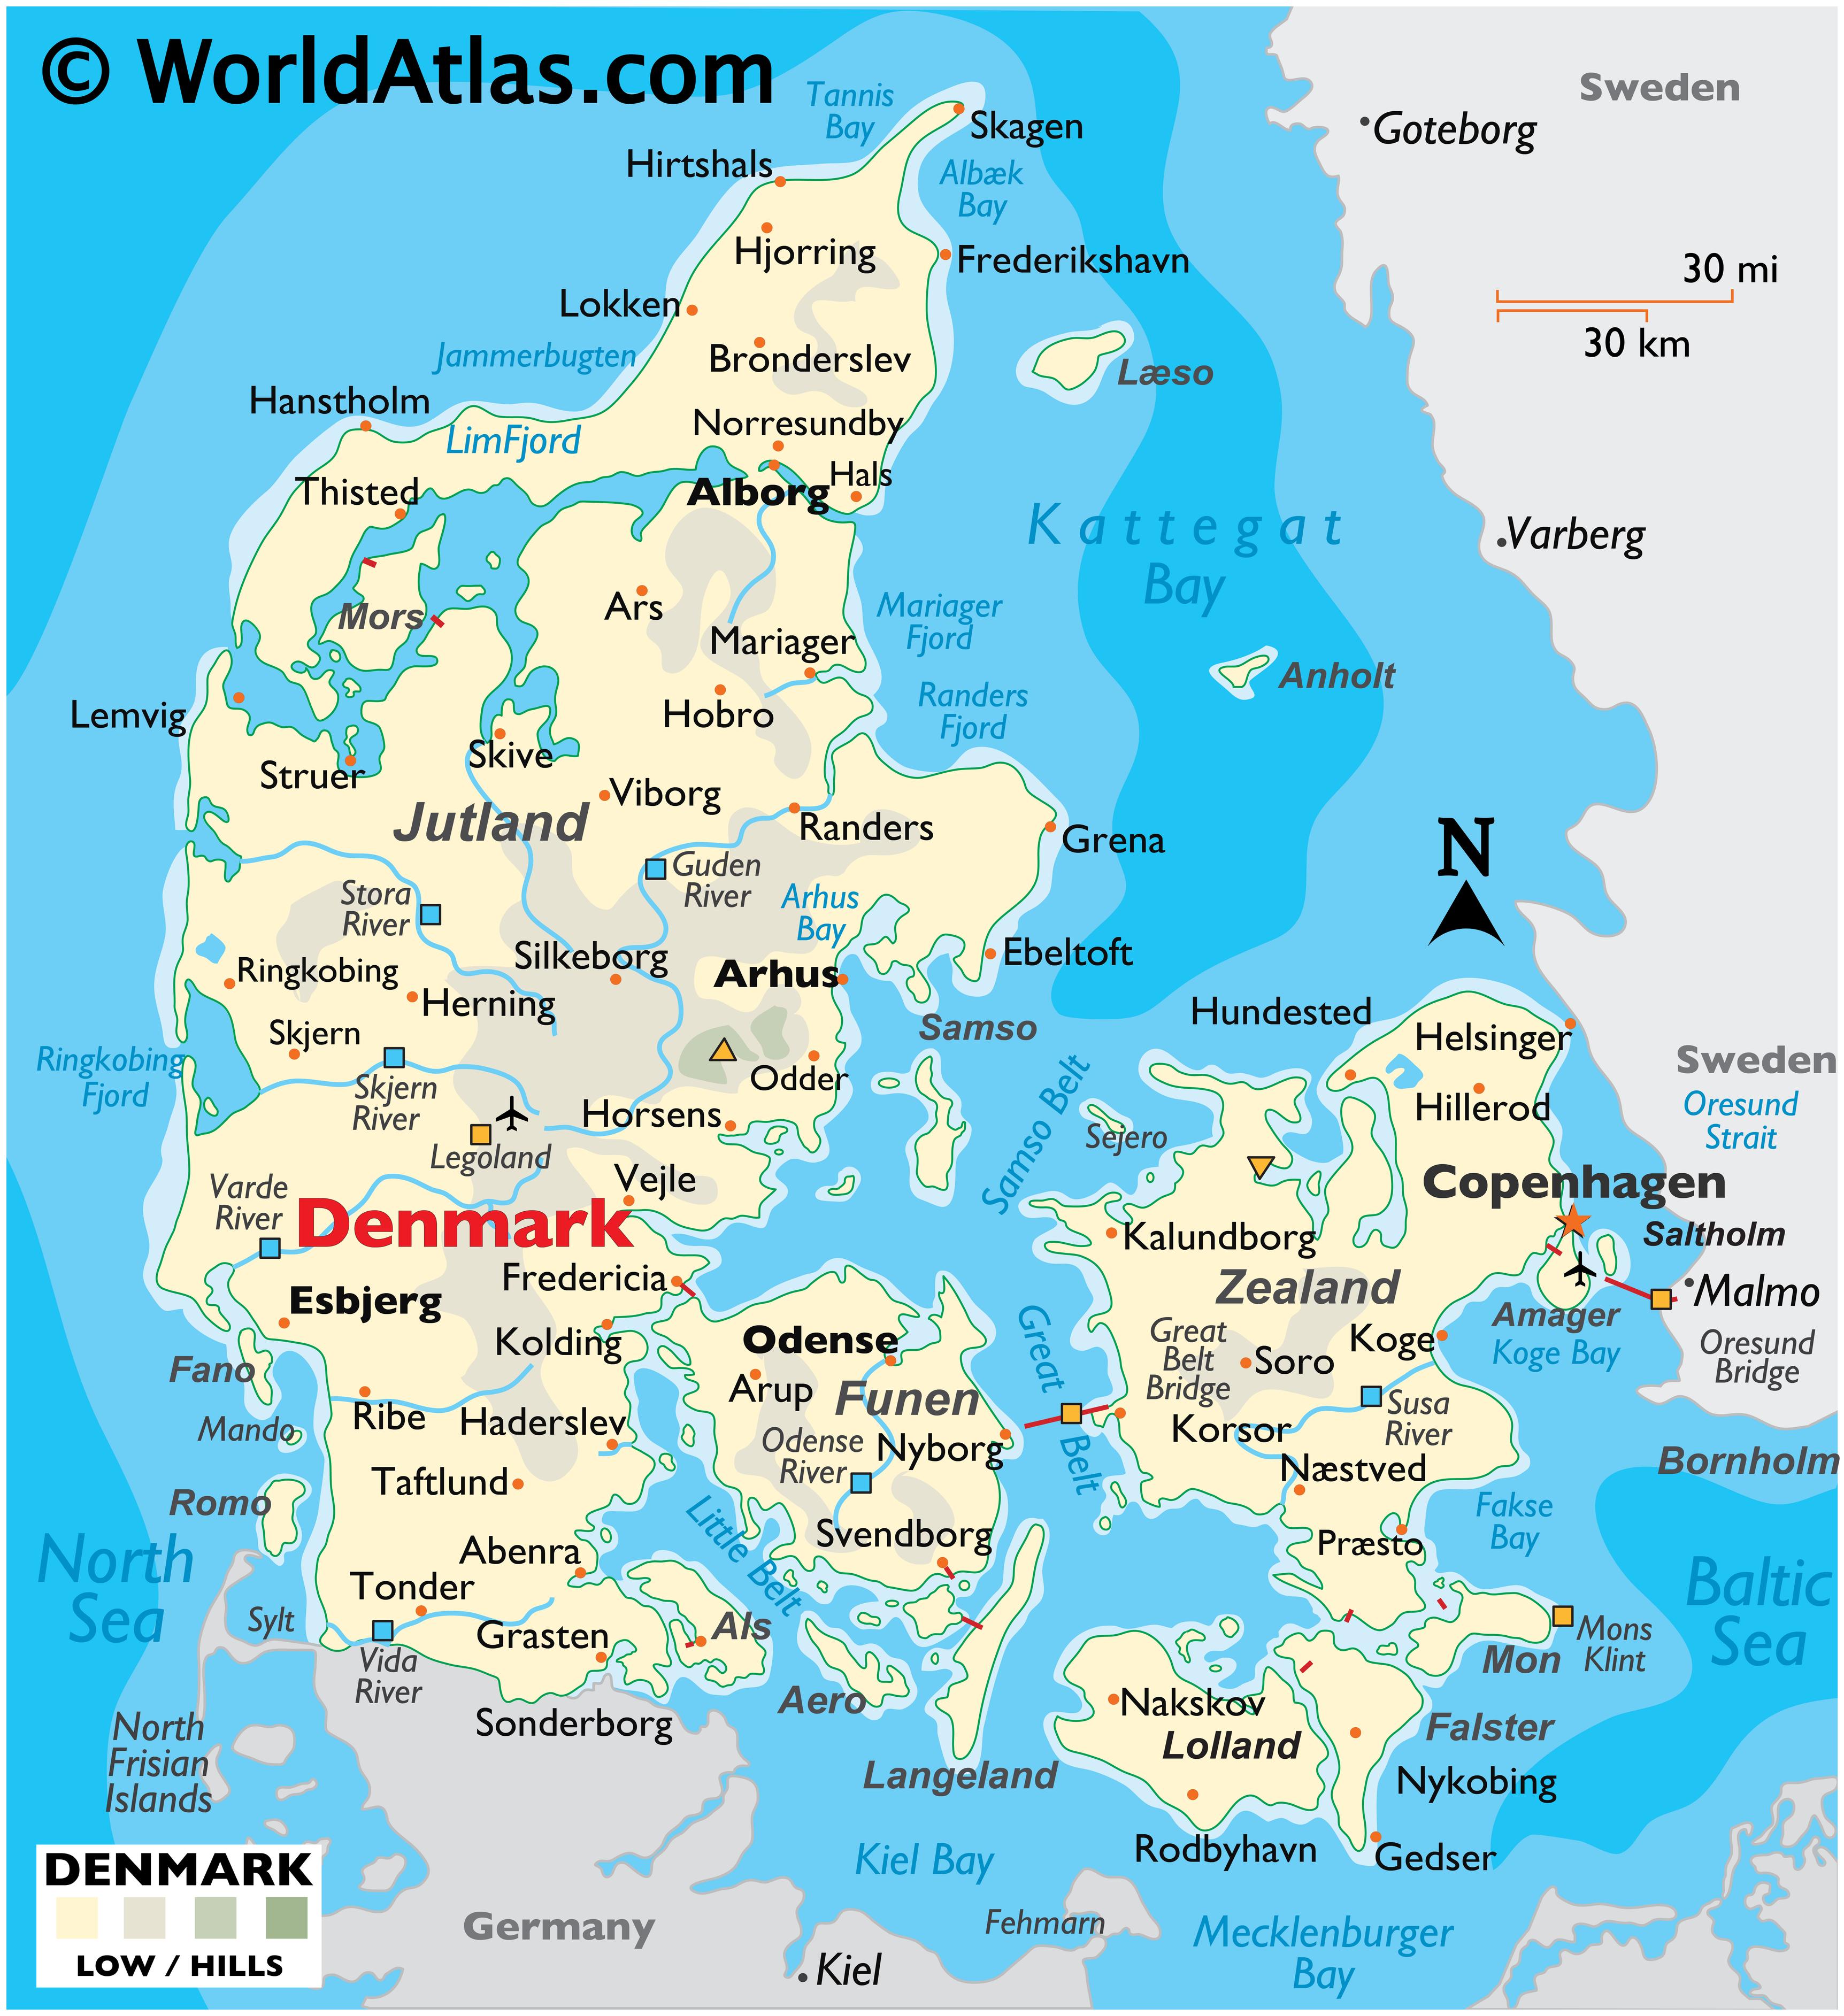 Denmark Attractions, Travel and Vacation Suggestions